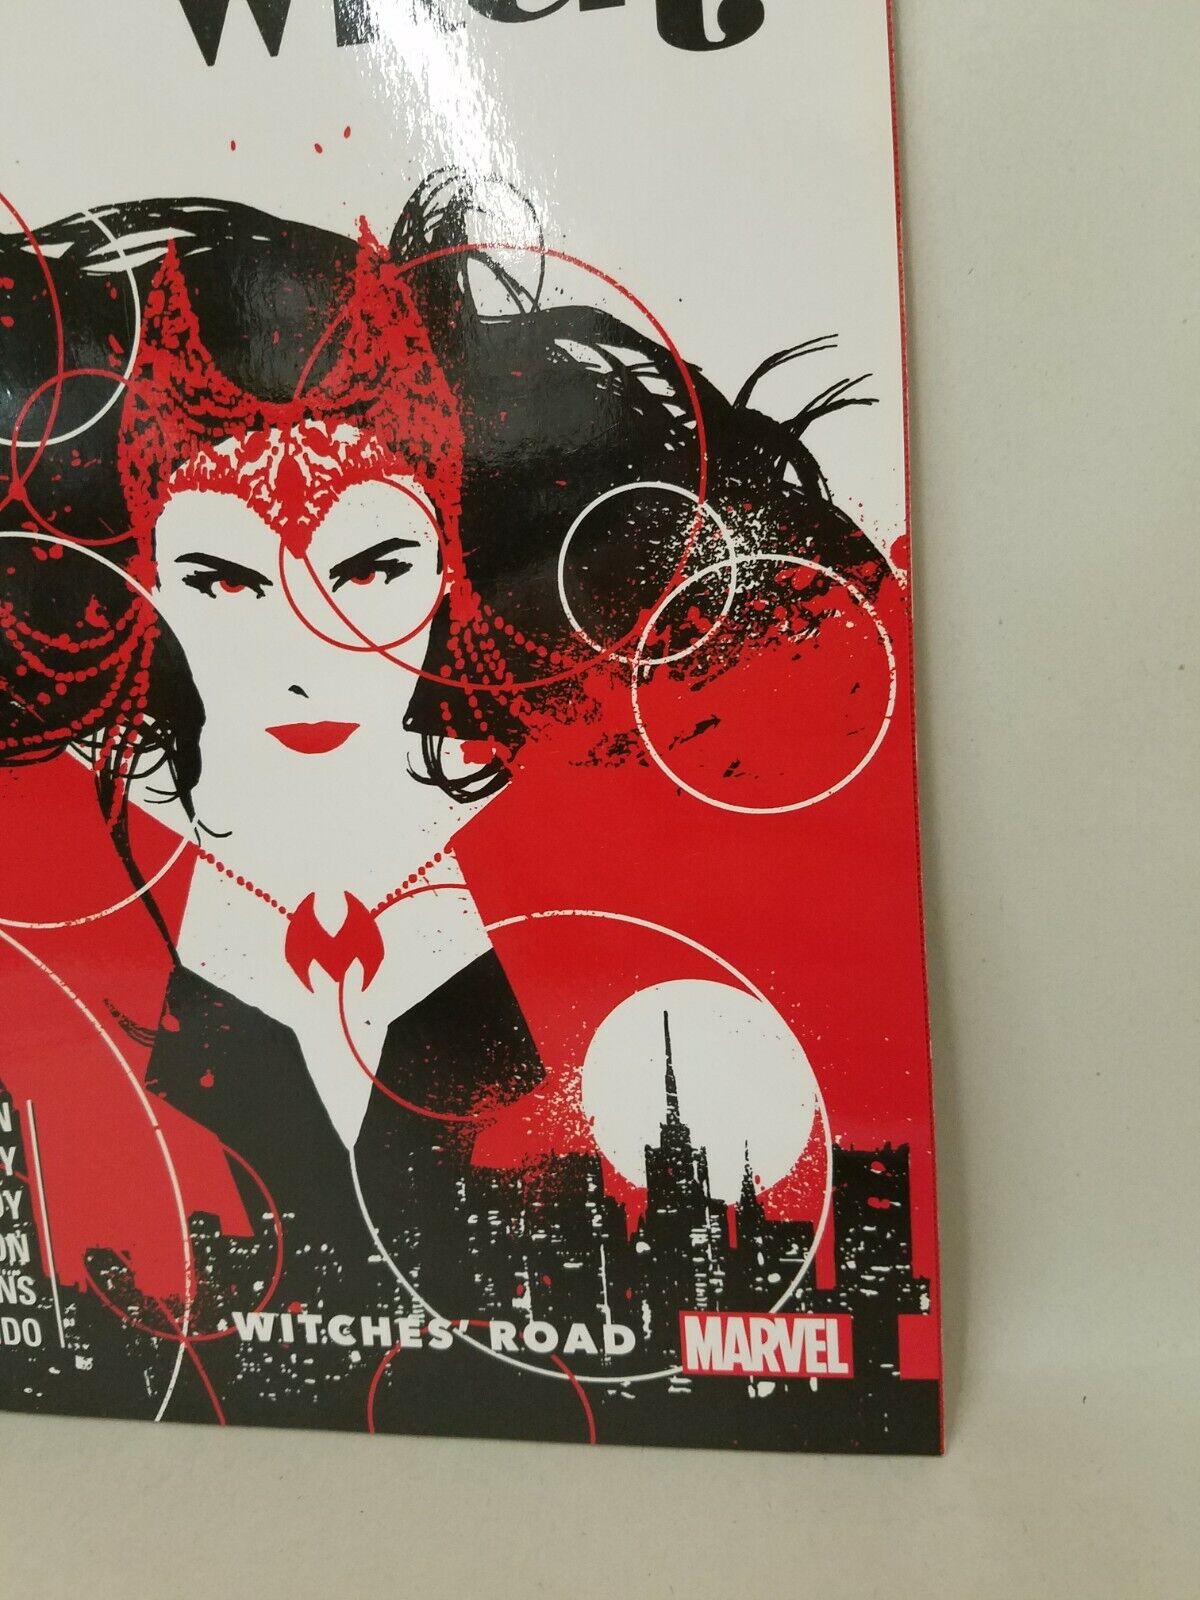 Scarlet Witch Vol 1 Witches' Road (2016) Marvel TPB Wanda Vision David Aja New